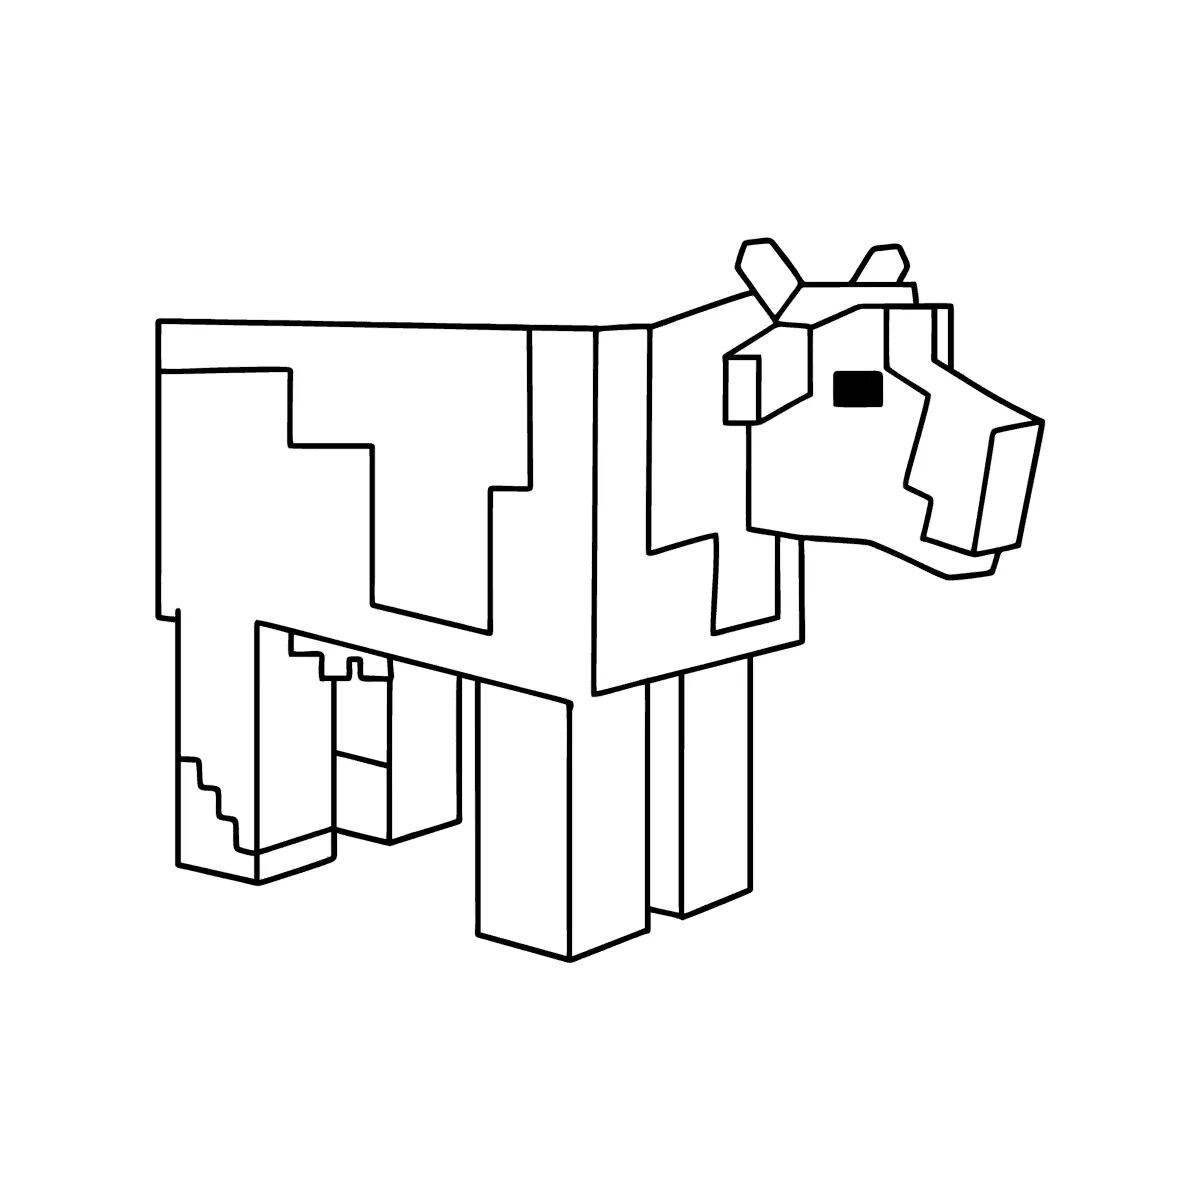 Cute minecraft dog coloring book